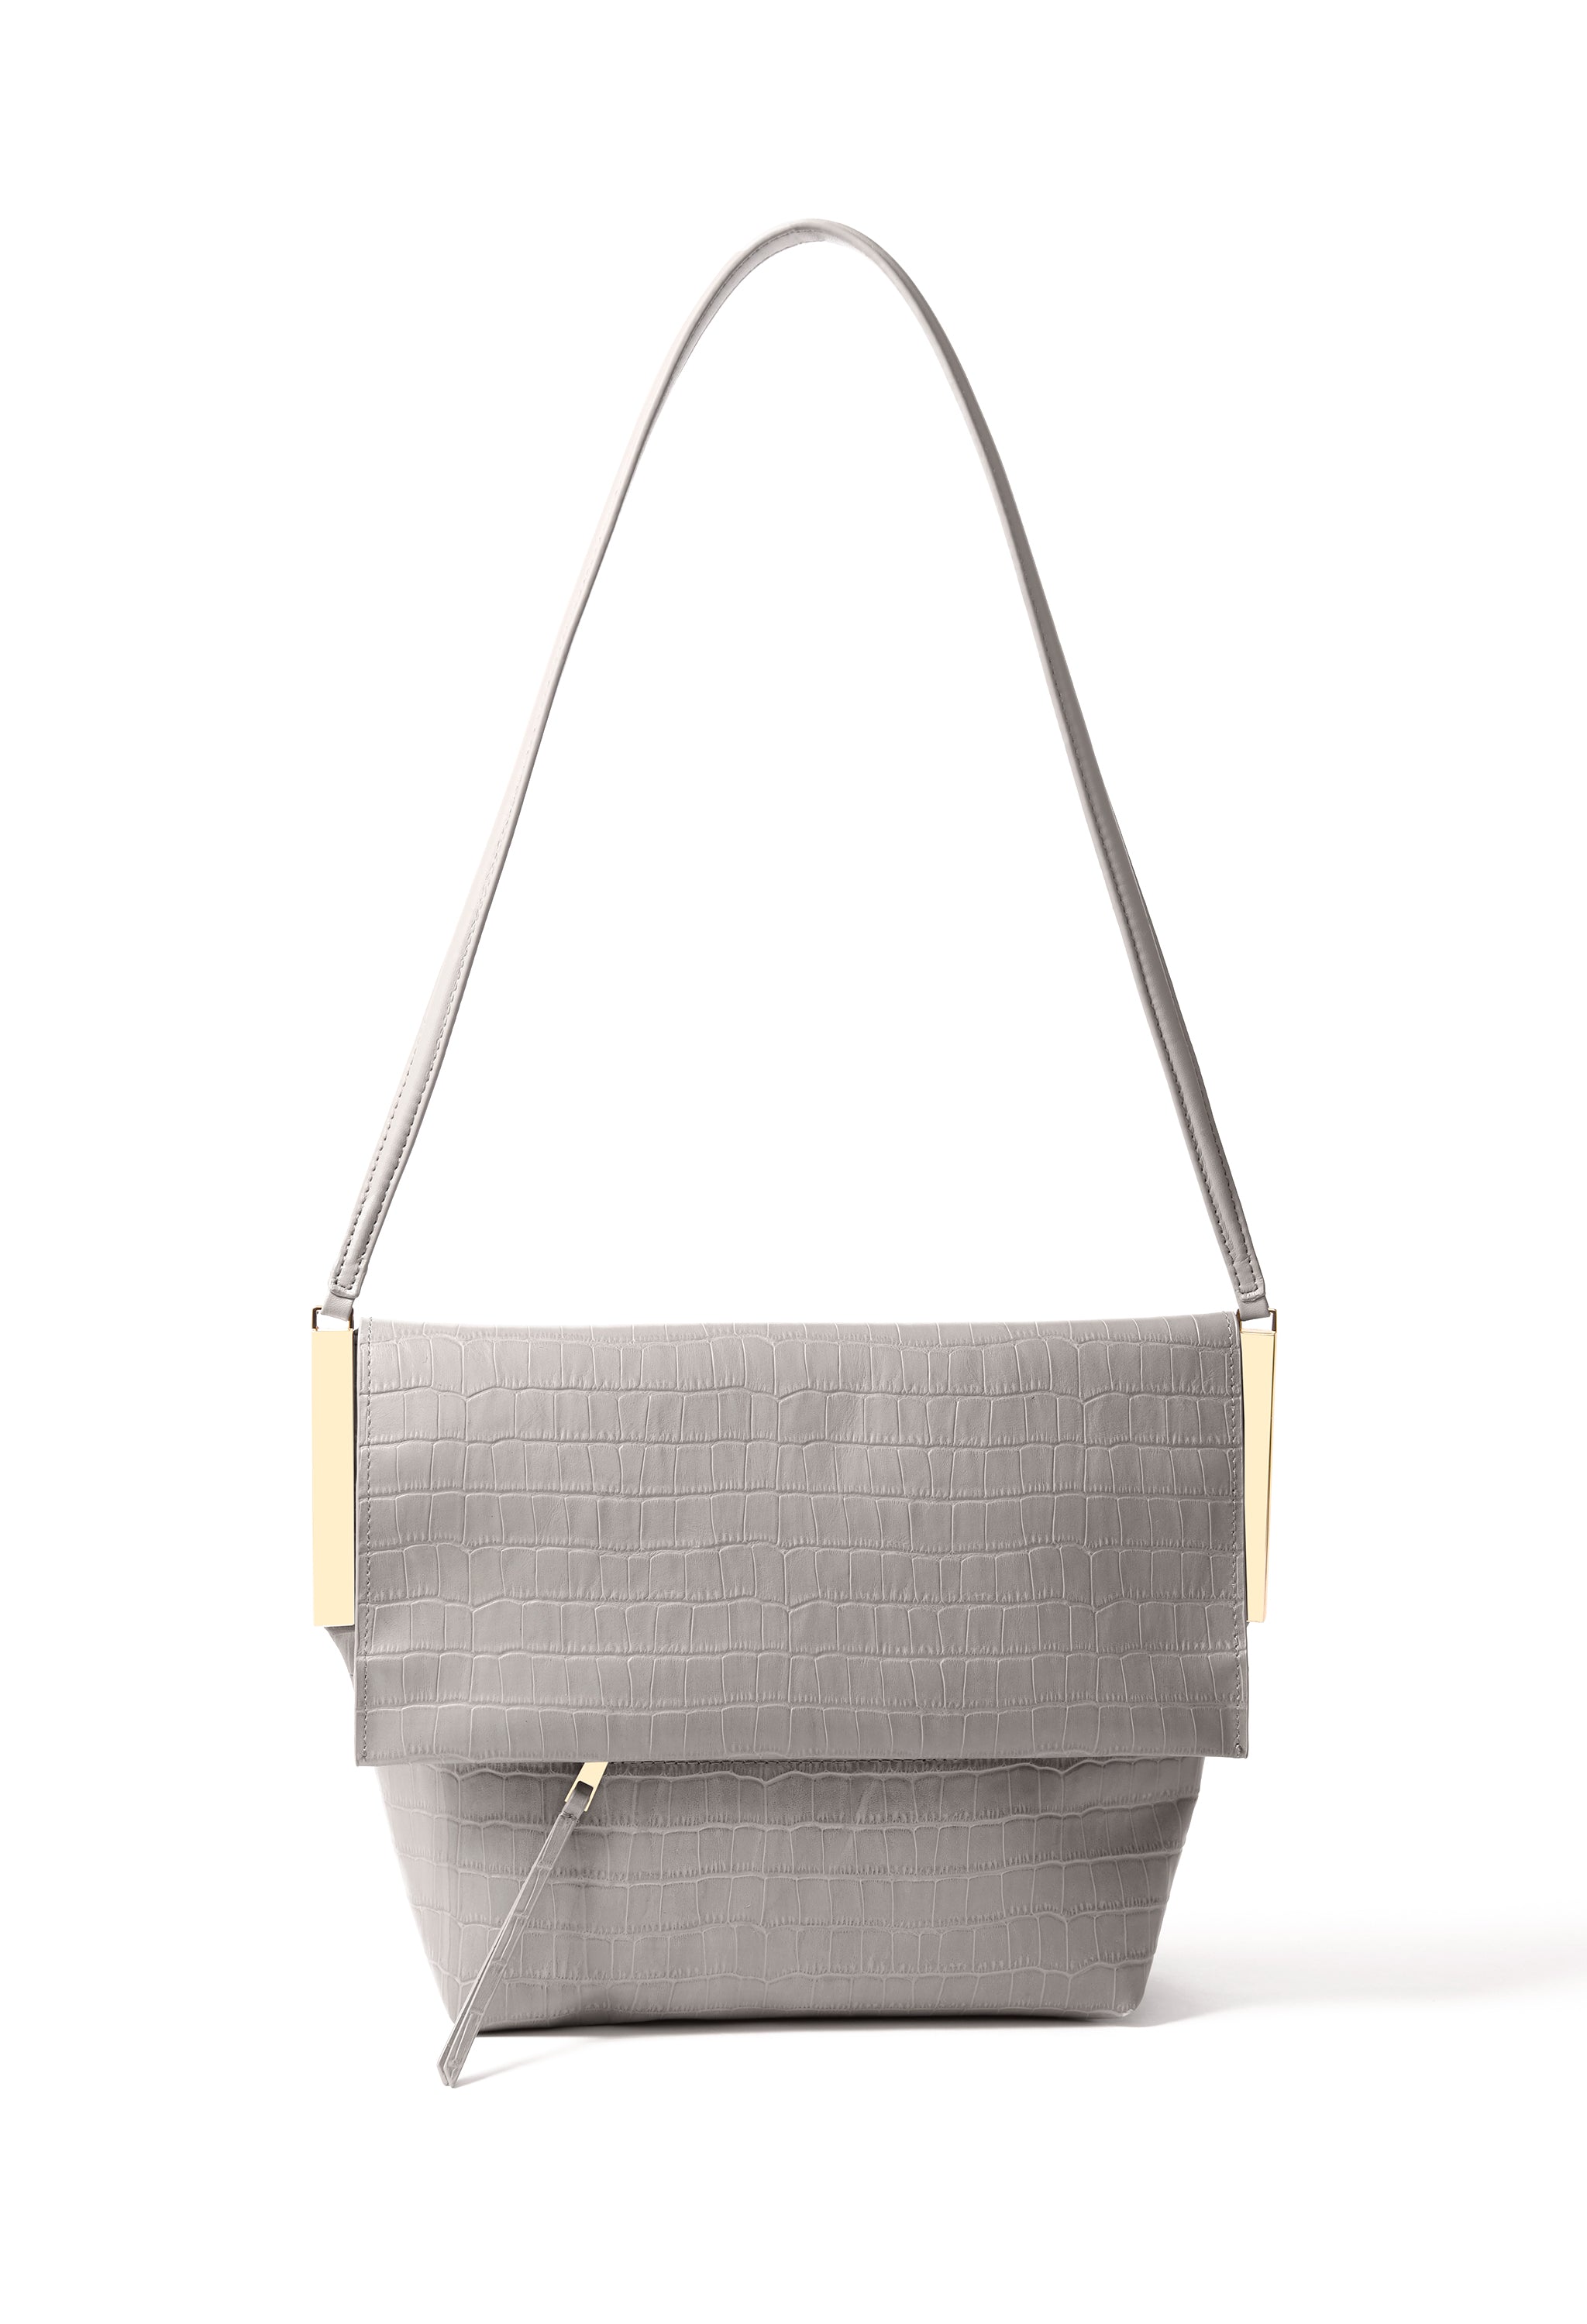 Giselle Bag in croco embossed leather, Gray